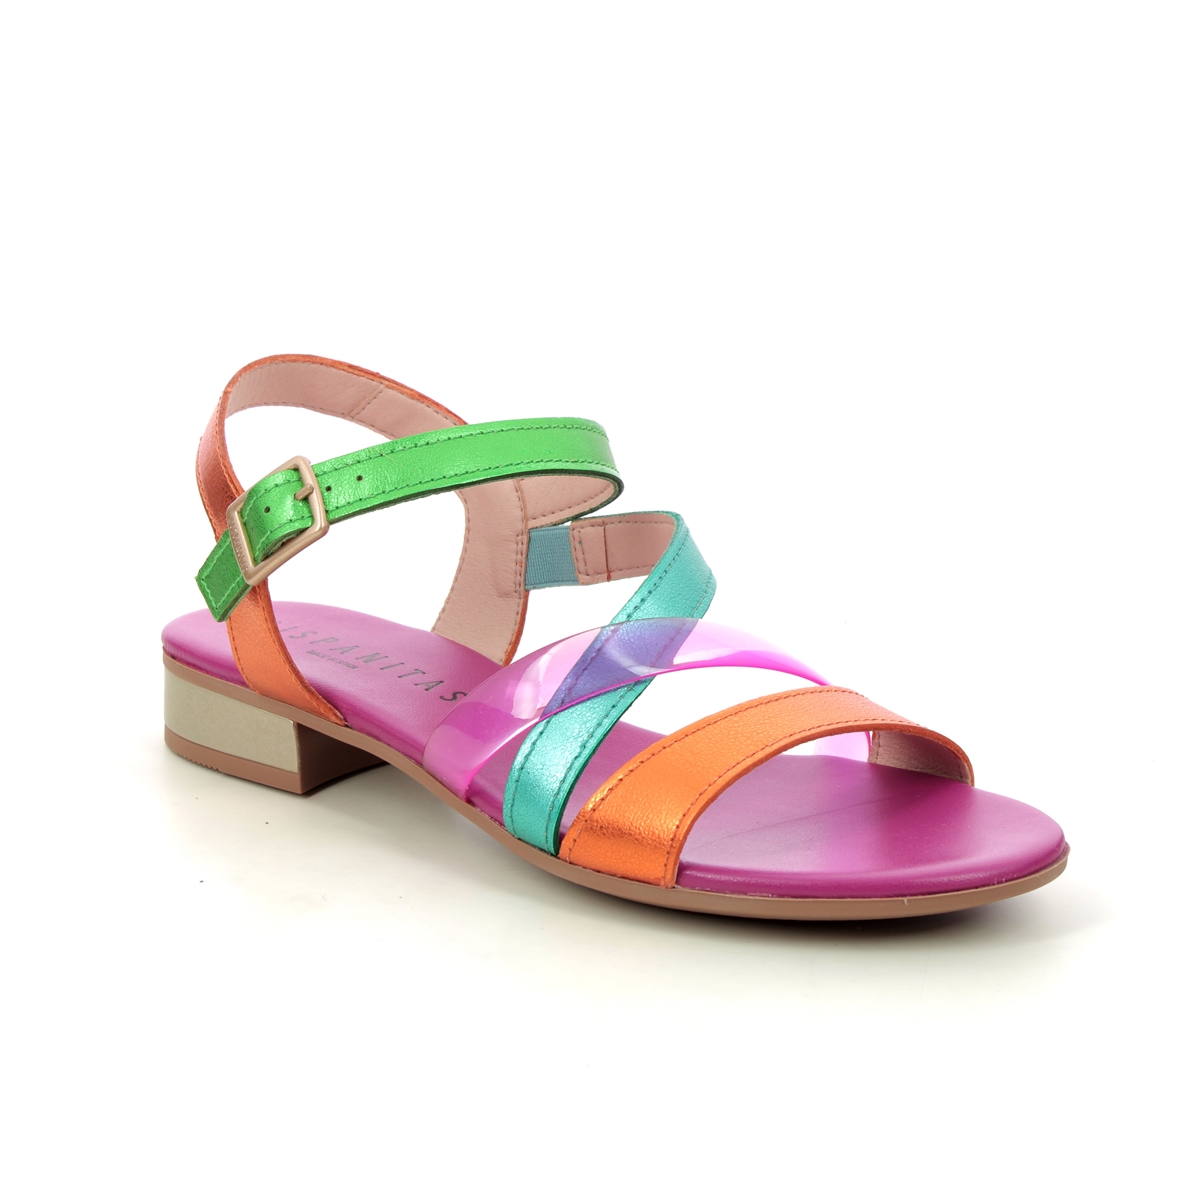 Hispanitas Lena Strappy Multi Coloured Womens Flat Sandals CHV243367-002 in a Plain Leather in Size 37